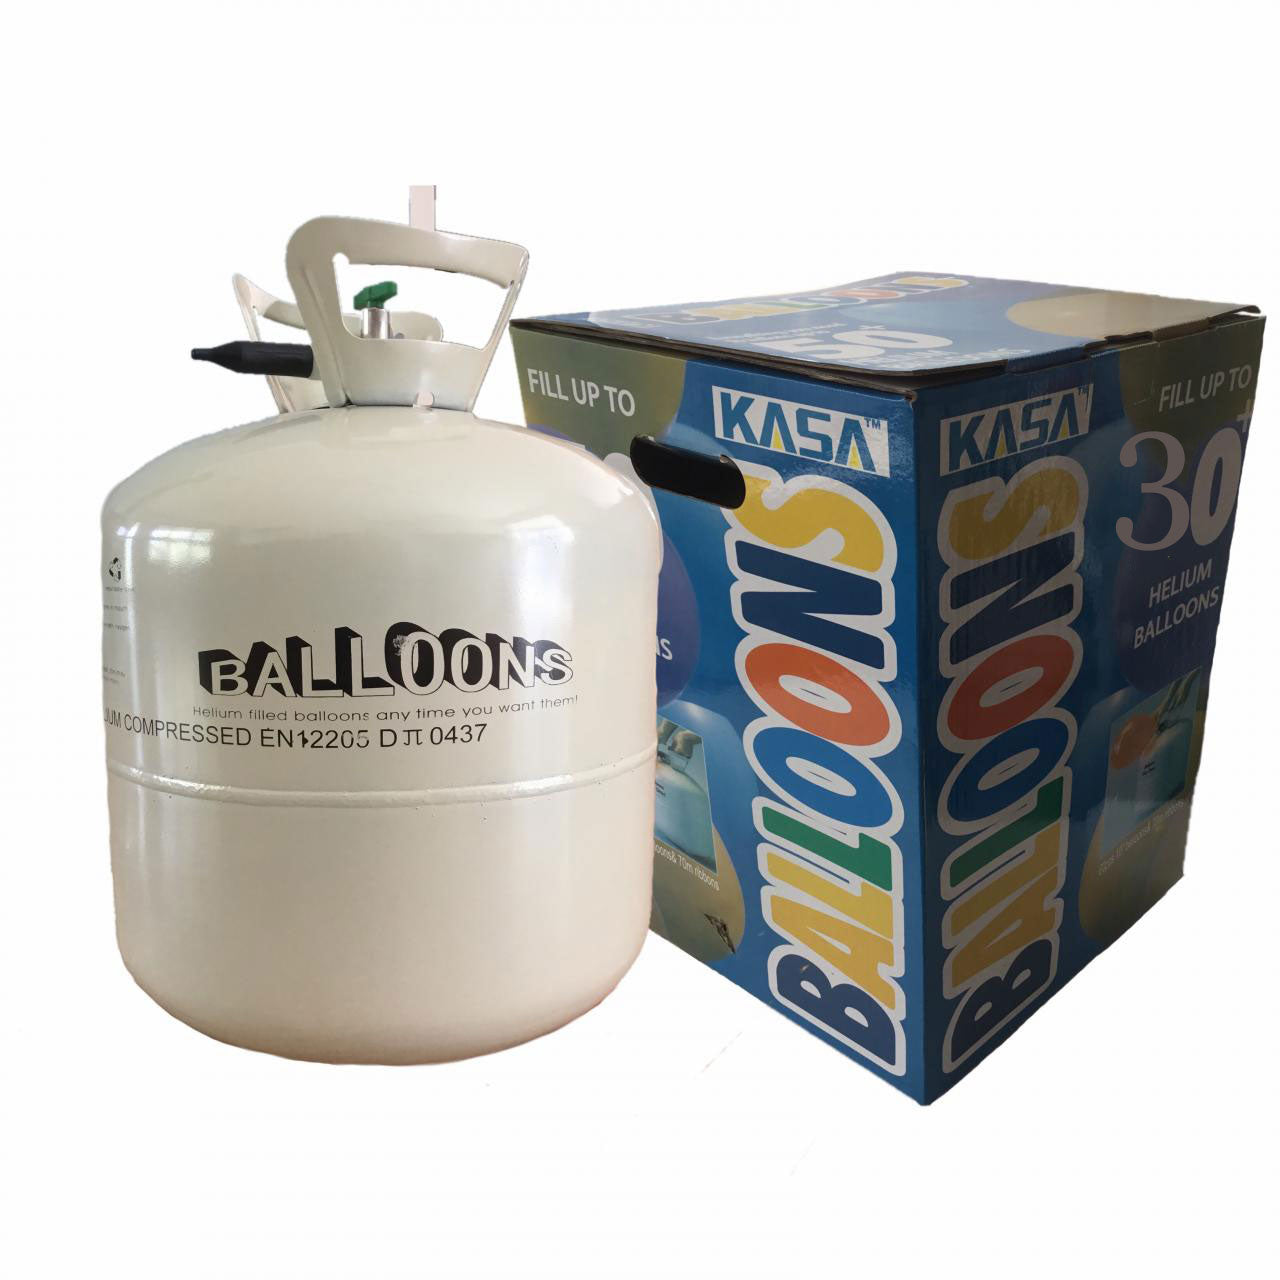  Helium balloon gas for up to 30 balloons